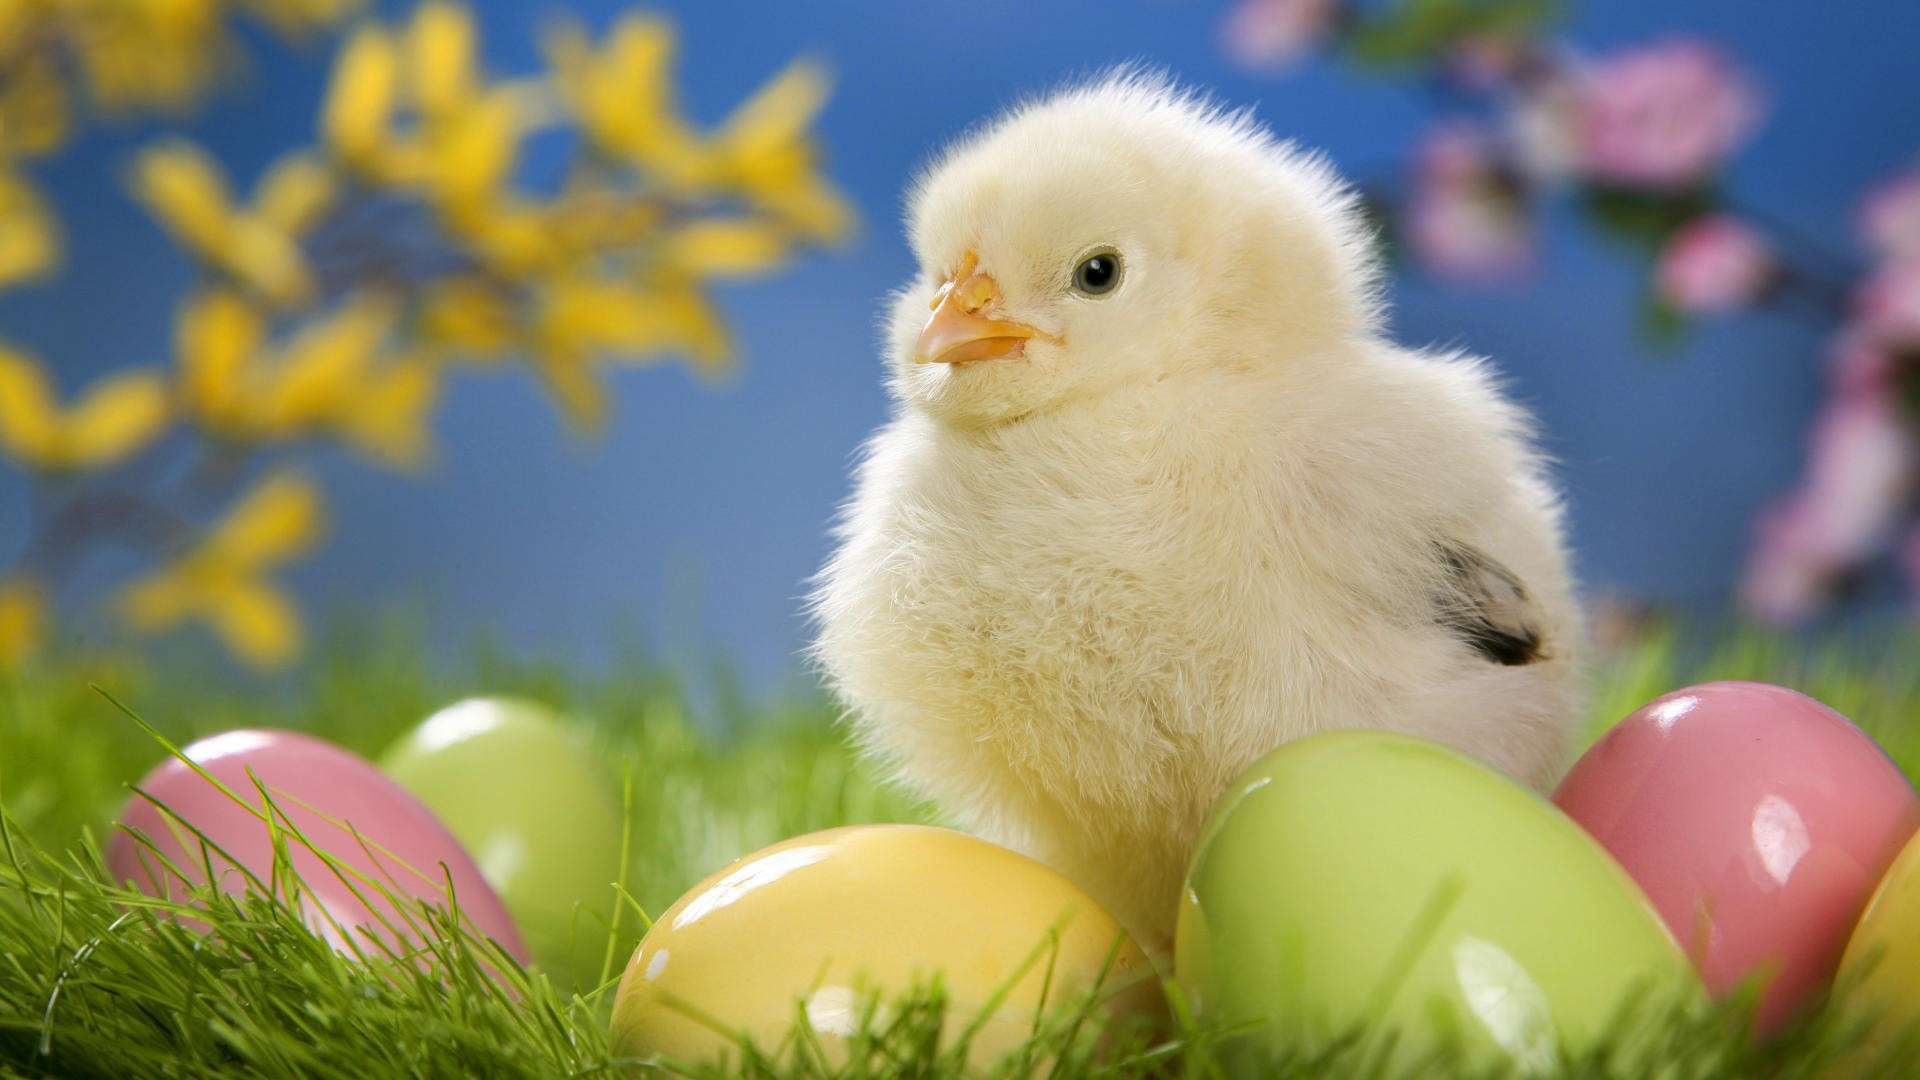 Cute Easter Chick with Eggs HD Wallpaper FullHDWpp   Full HD